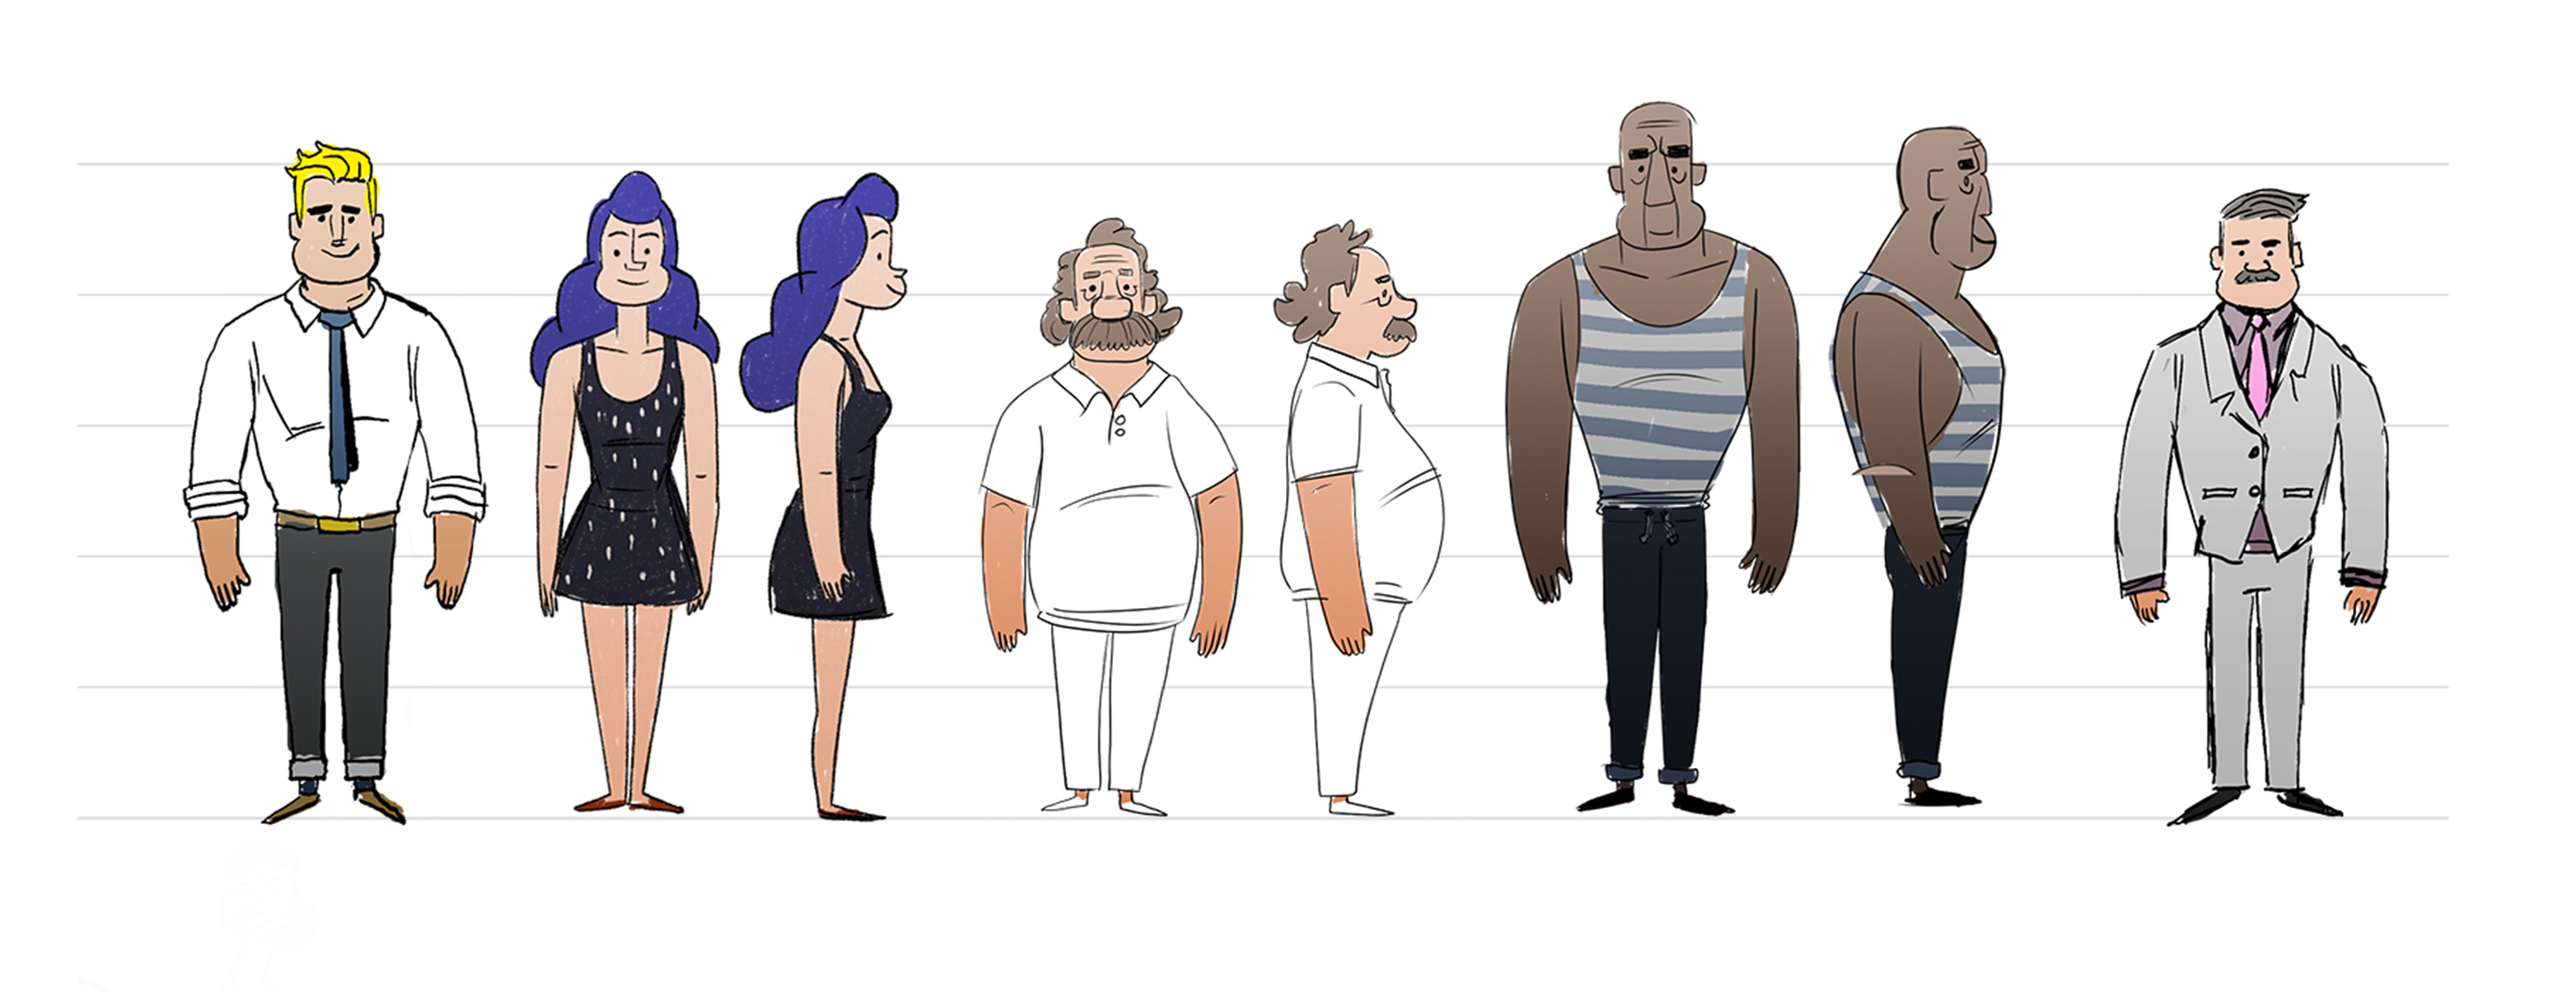 design for 3d characters